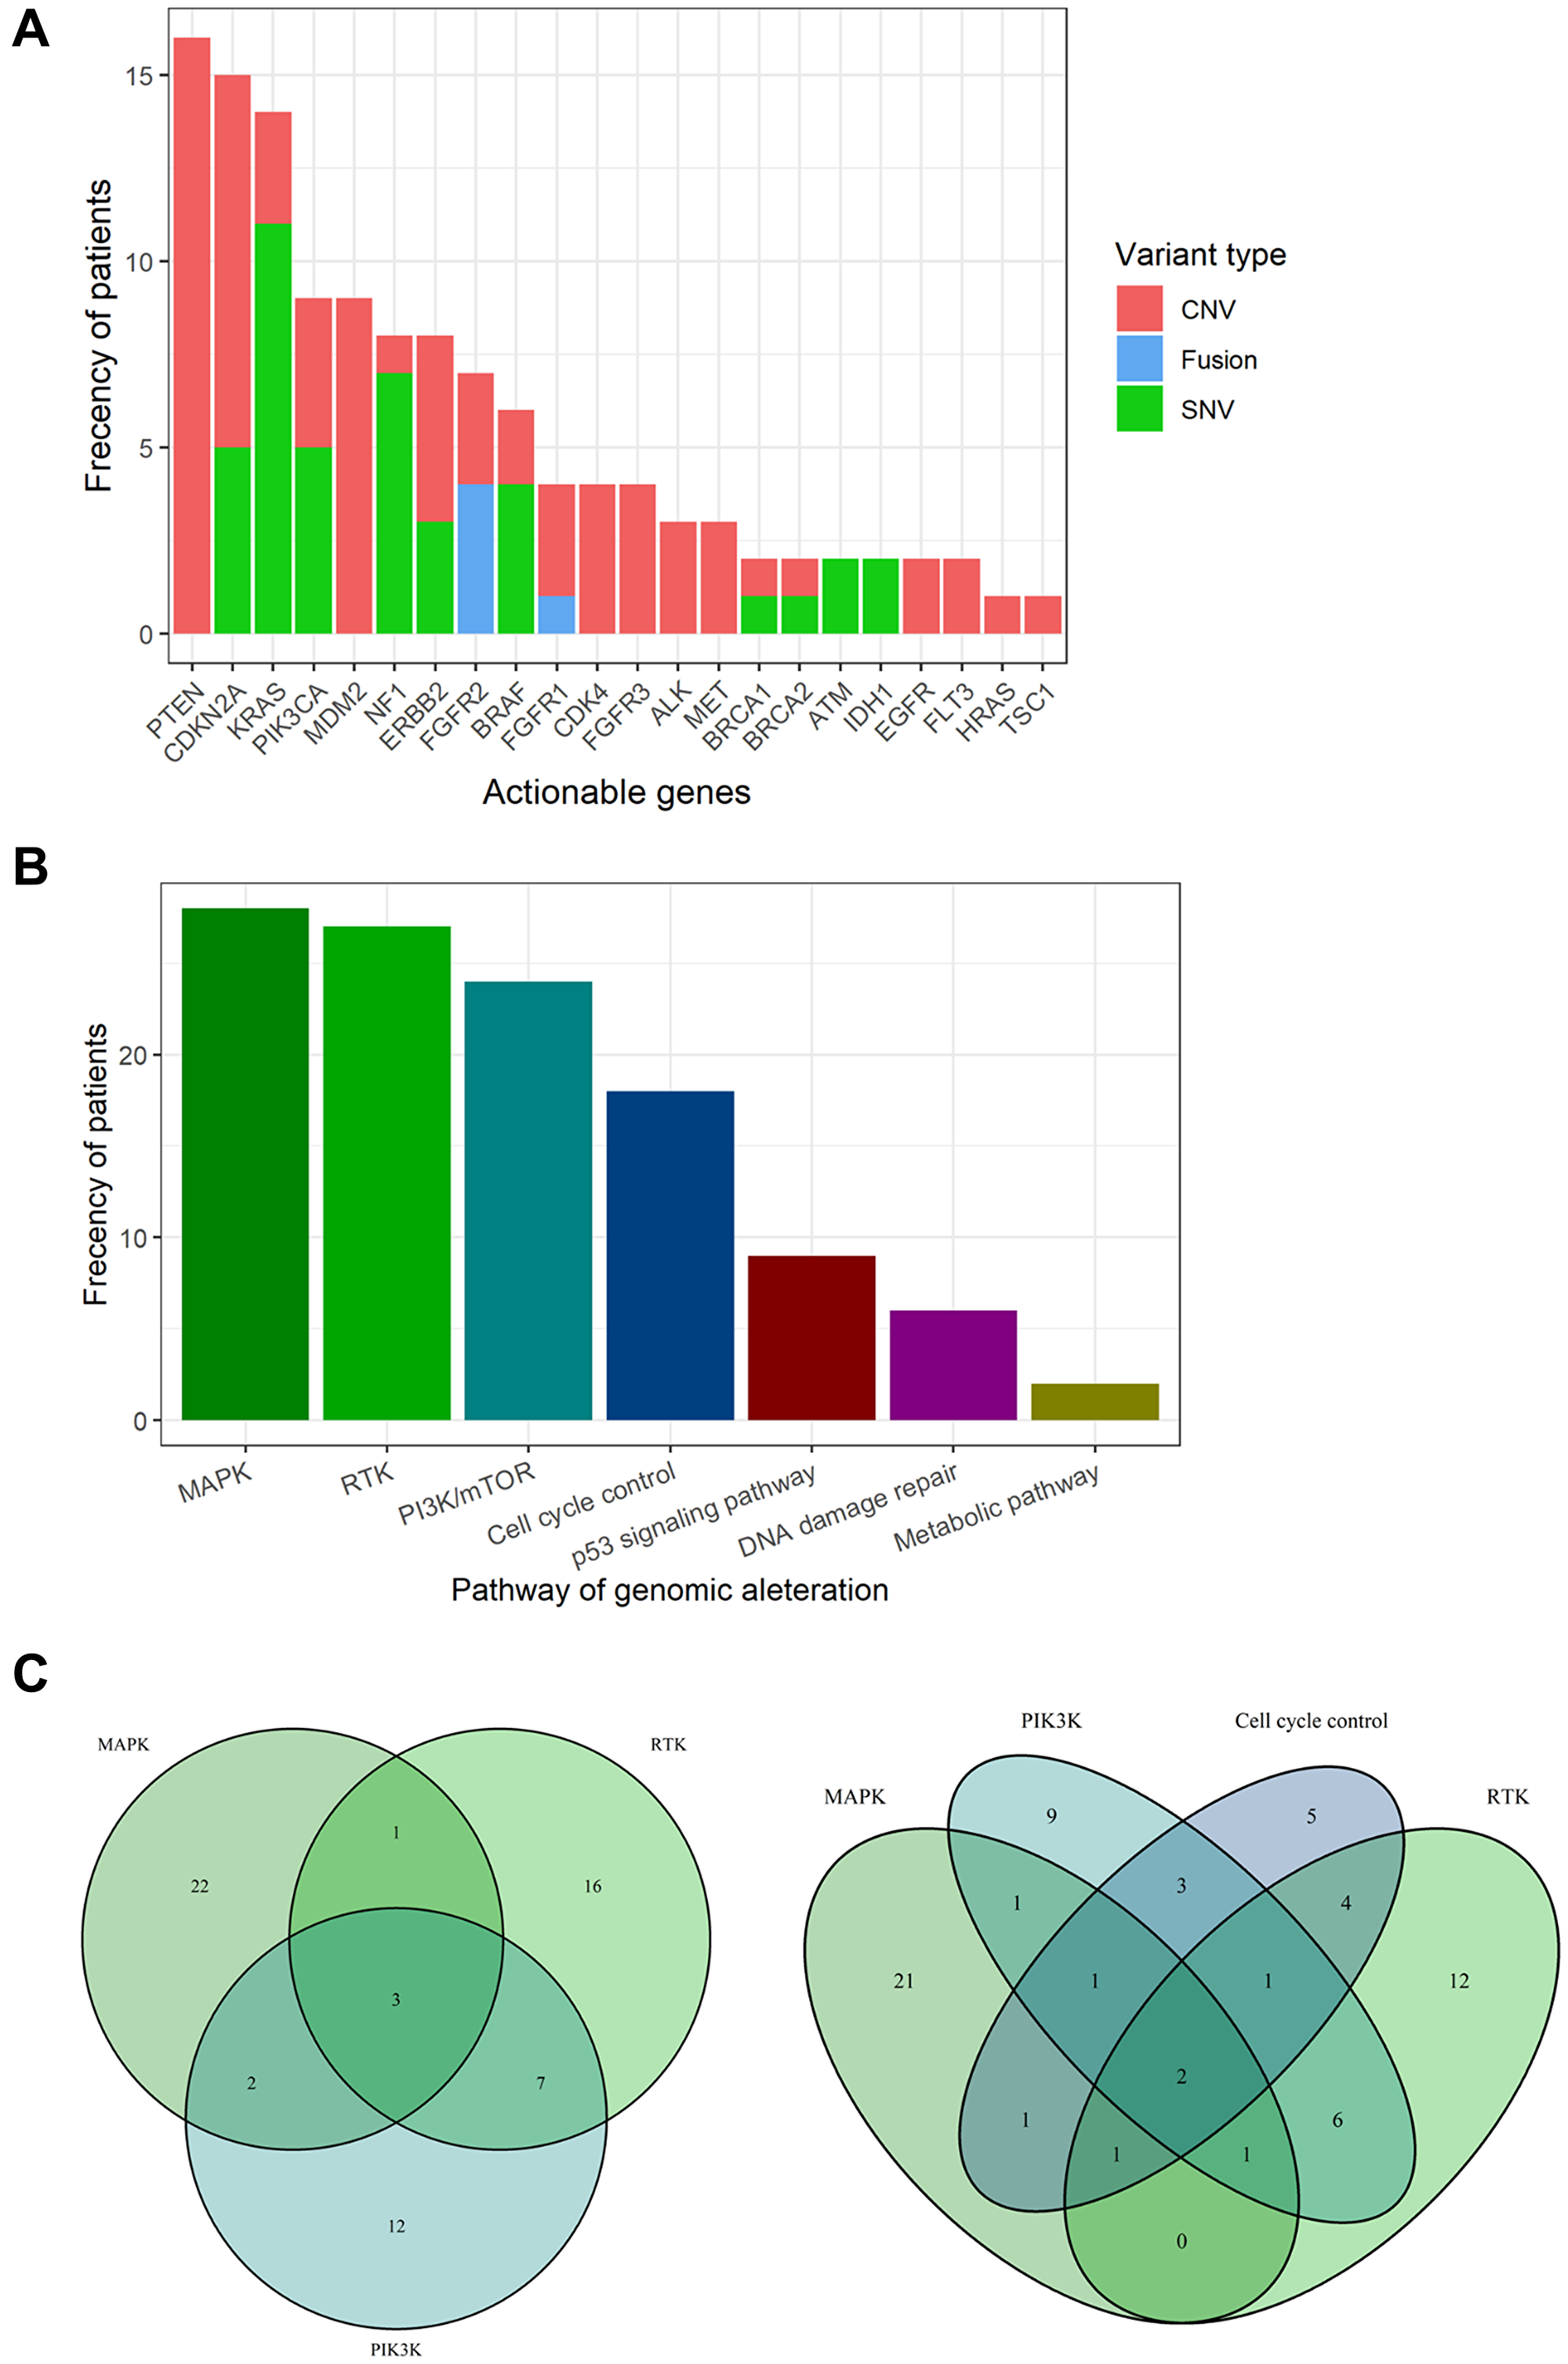 Actionable genes and pathways in biliary tract cancer.